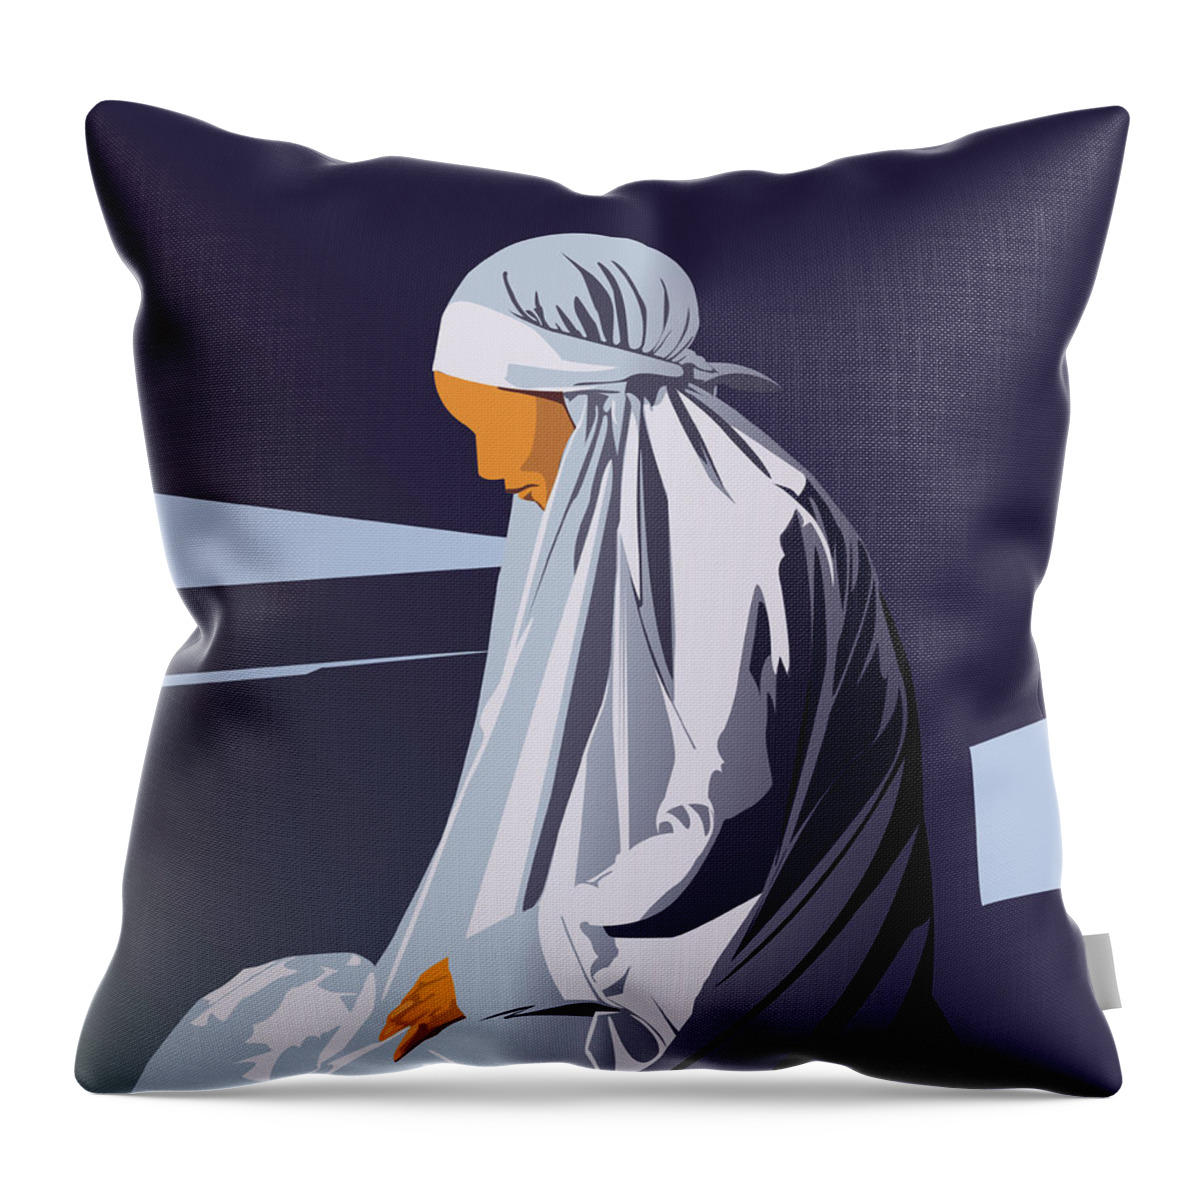 Muslim Throw Pillow featuring the digital art Reflection at Fajr by Scheme Of Things Graphics